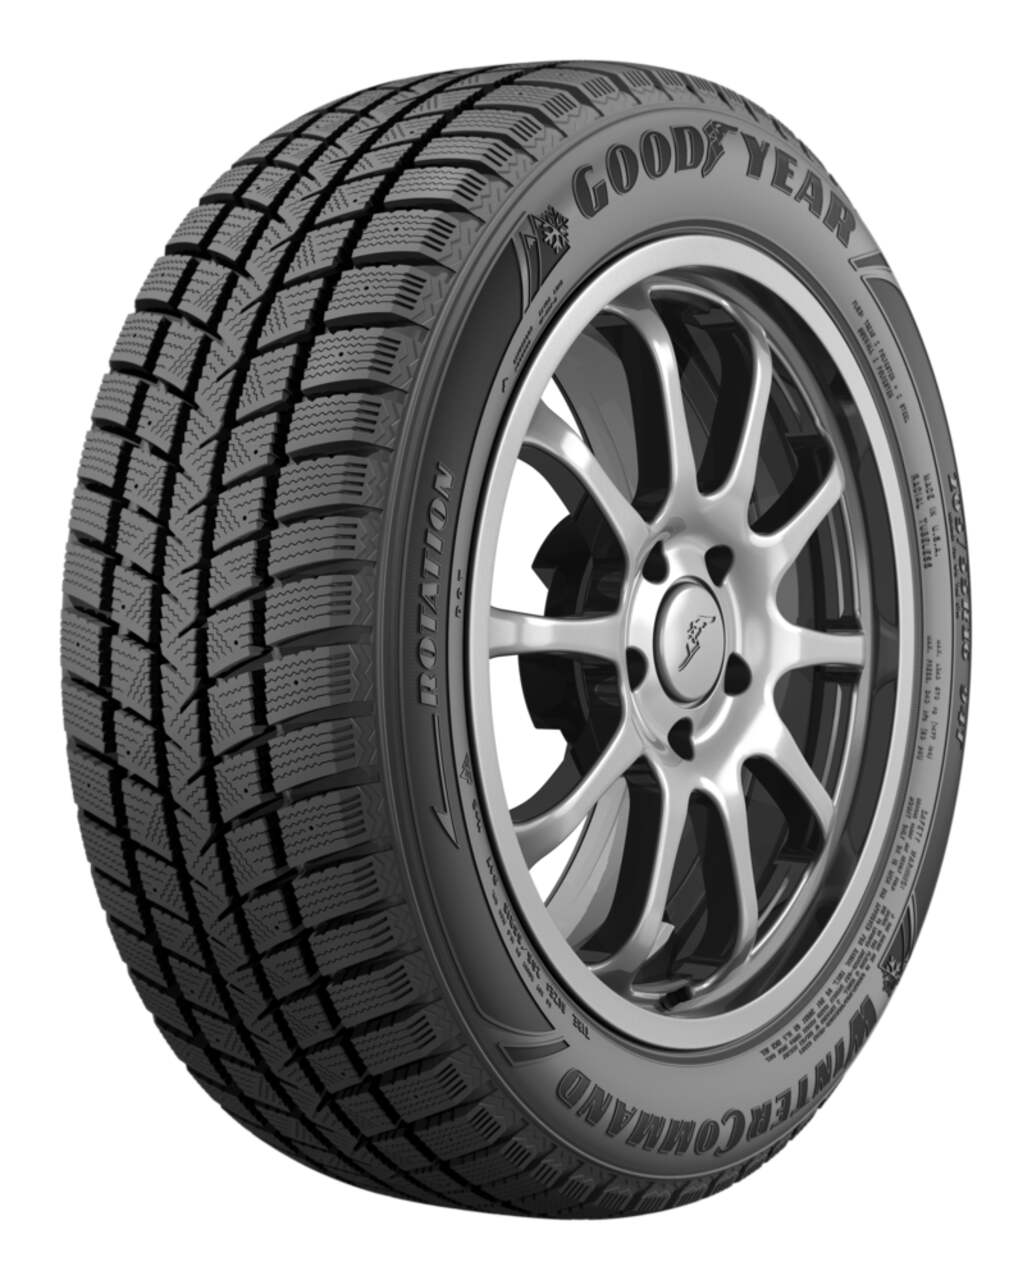 Goodyear Winter Tires - Buyers Guide